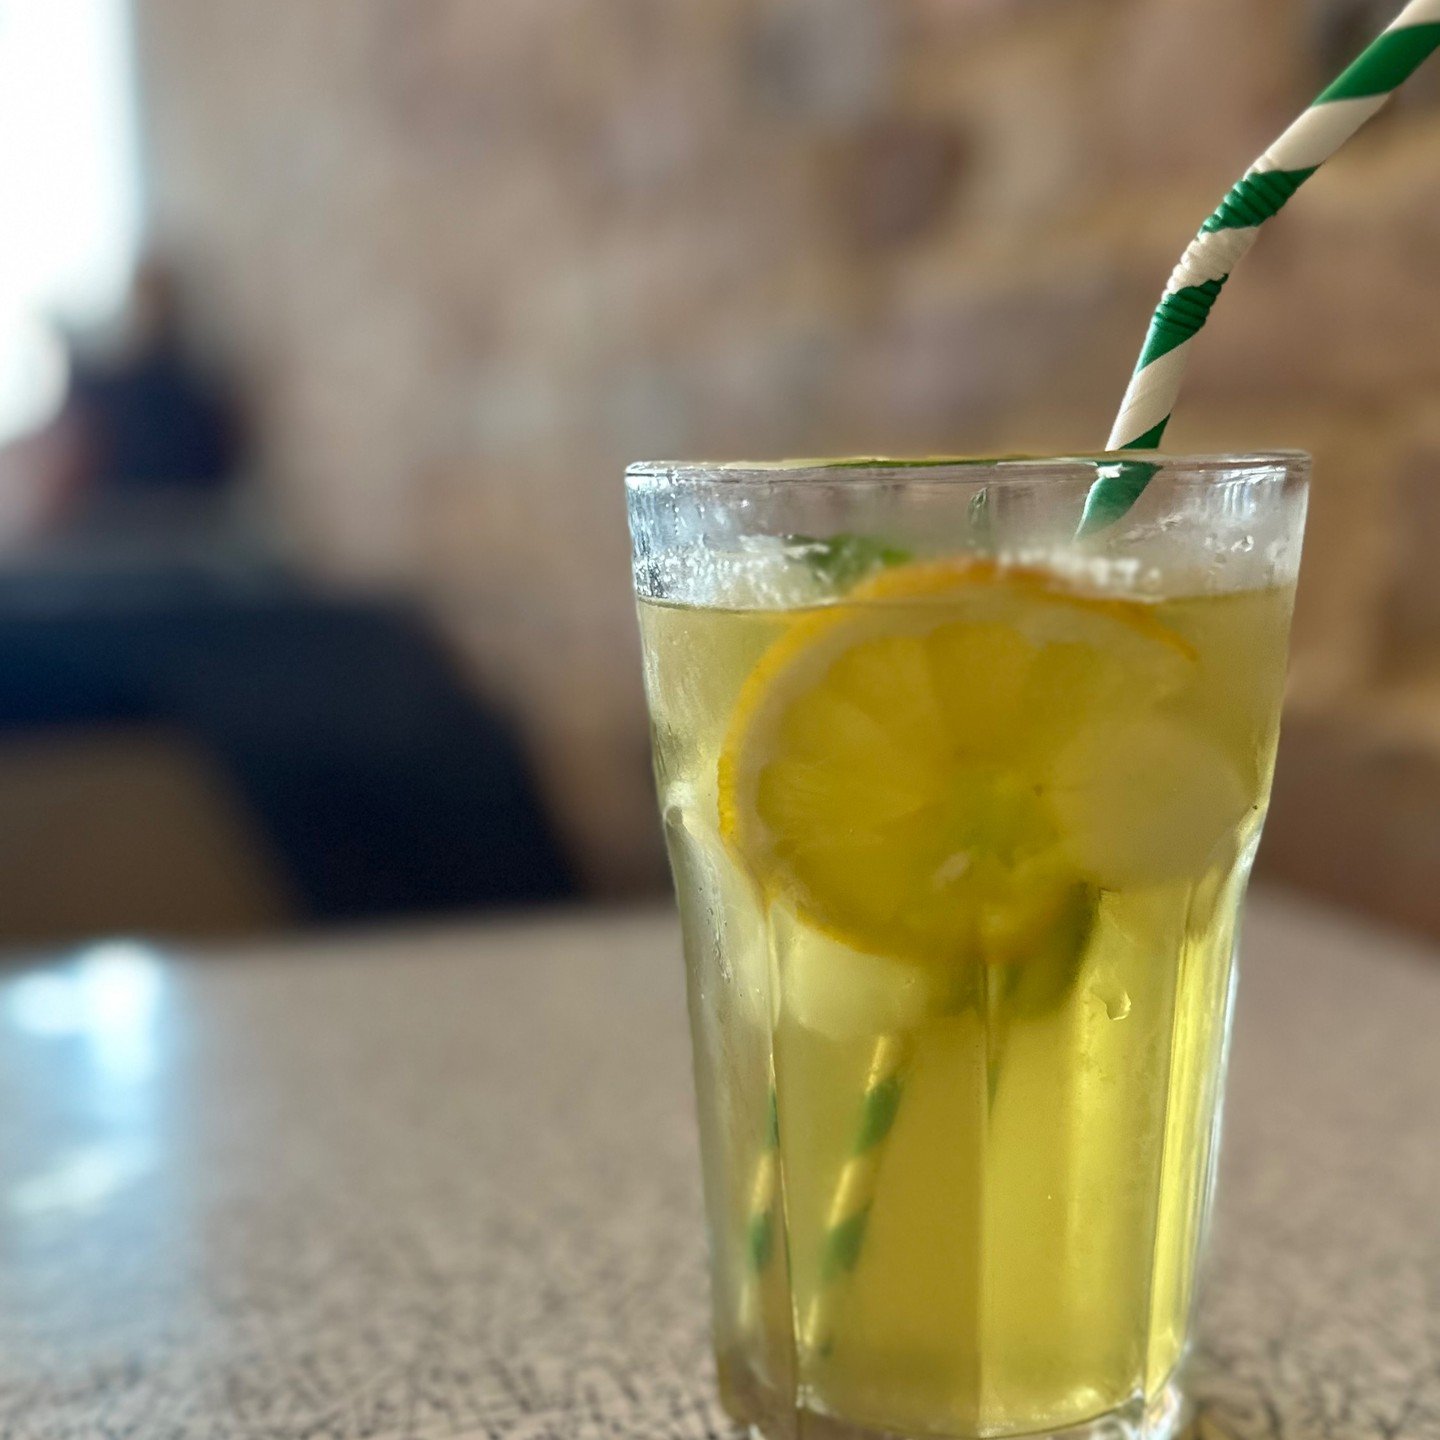 Our Iced Green Tea is light and refreshing and perfect for this weather. We've been drinking it all day. Can also be made into a cocktail with Creme de Menthe and Vodka! Delicious! 

#cakeroom #hastings #homemadecakes #trinitytranglehastings #America